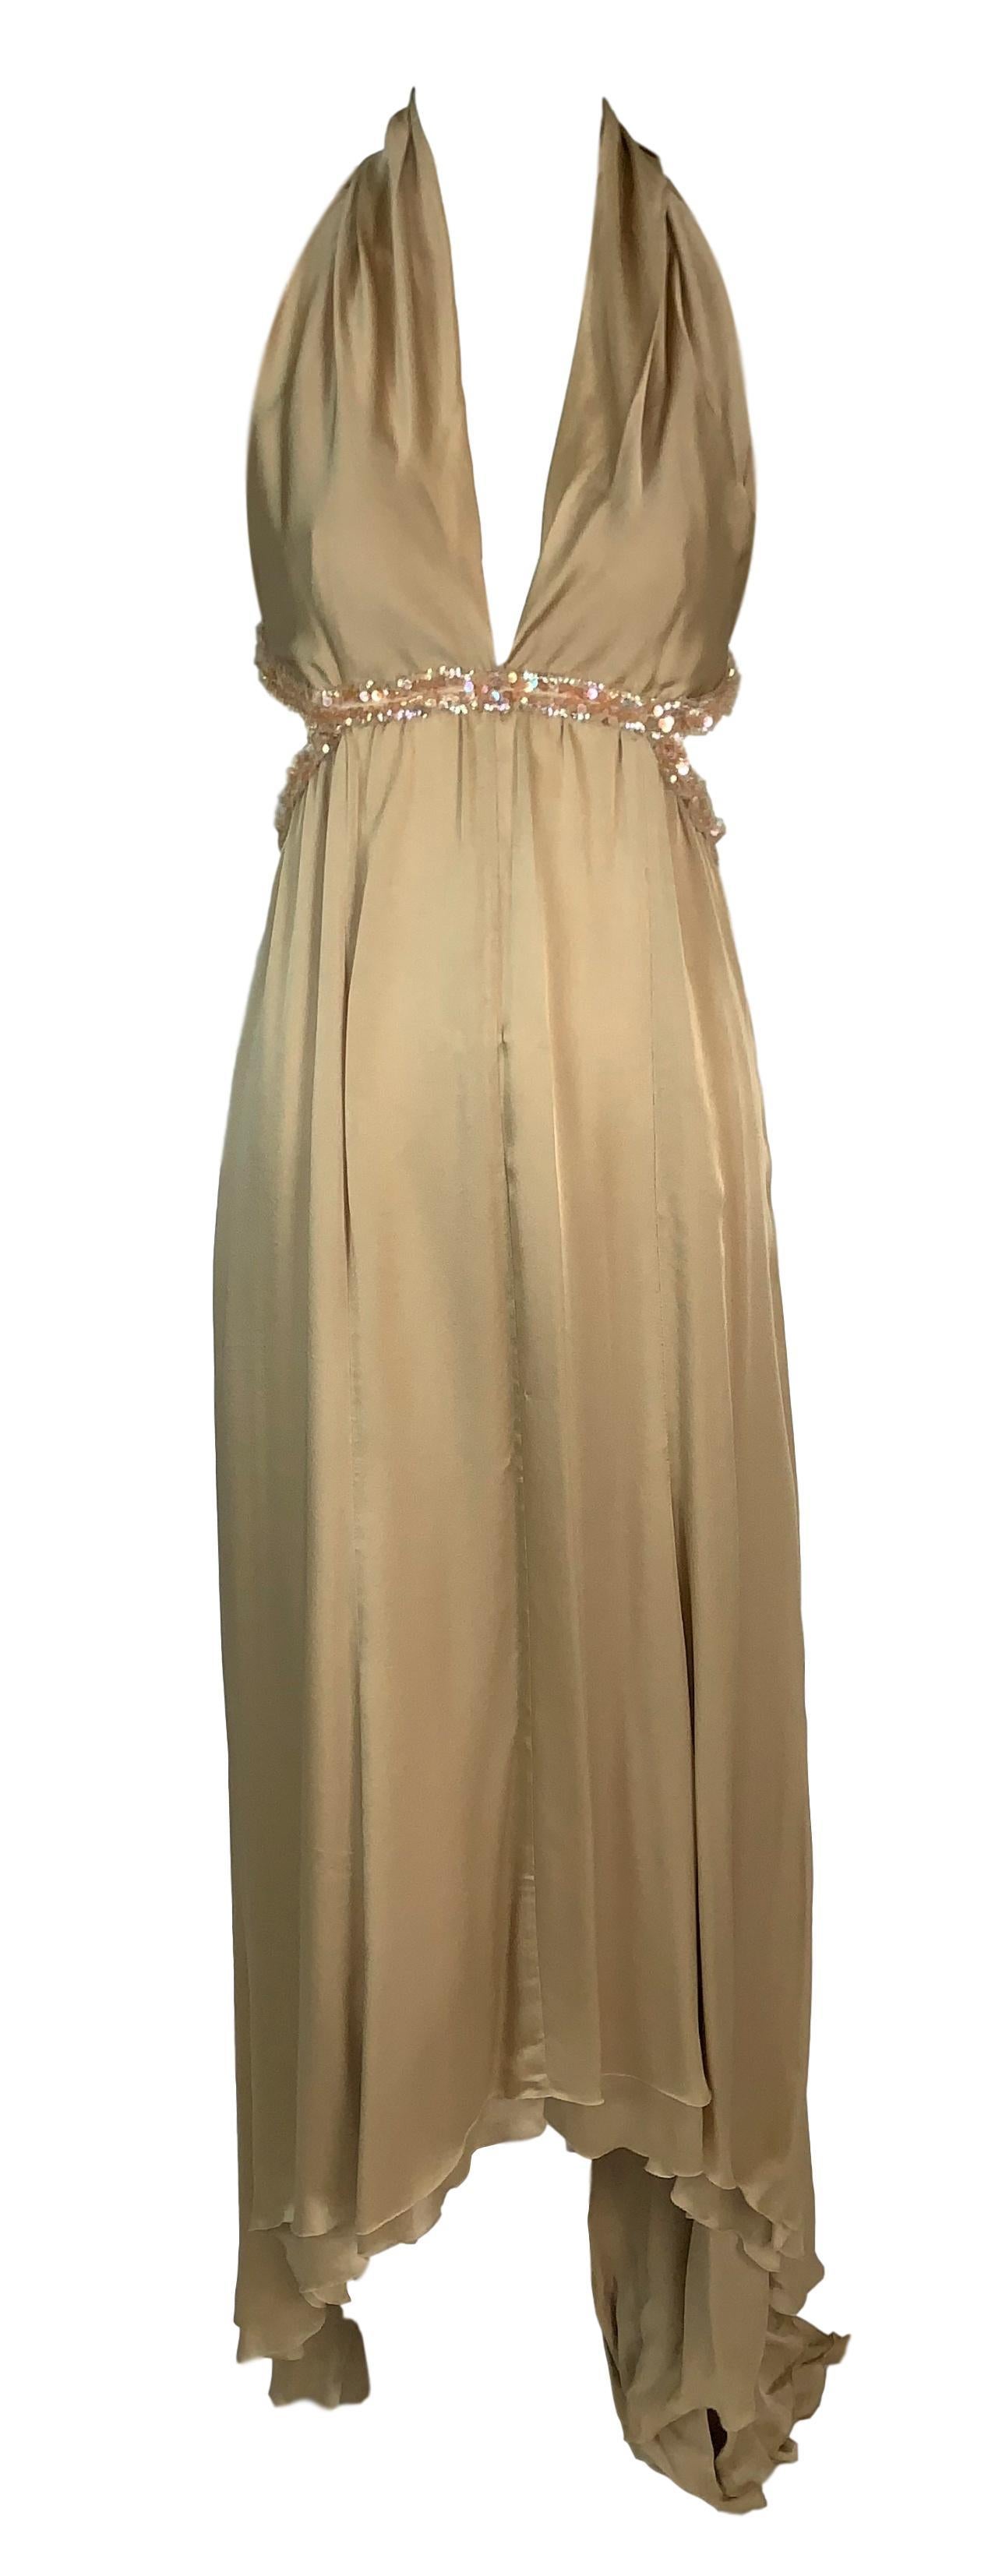 Brown S/S 2003 Chanel Nude Silk Cut-Out Plunging Embellished Gown Dress